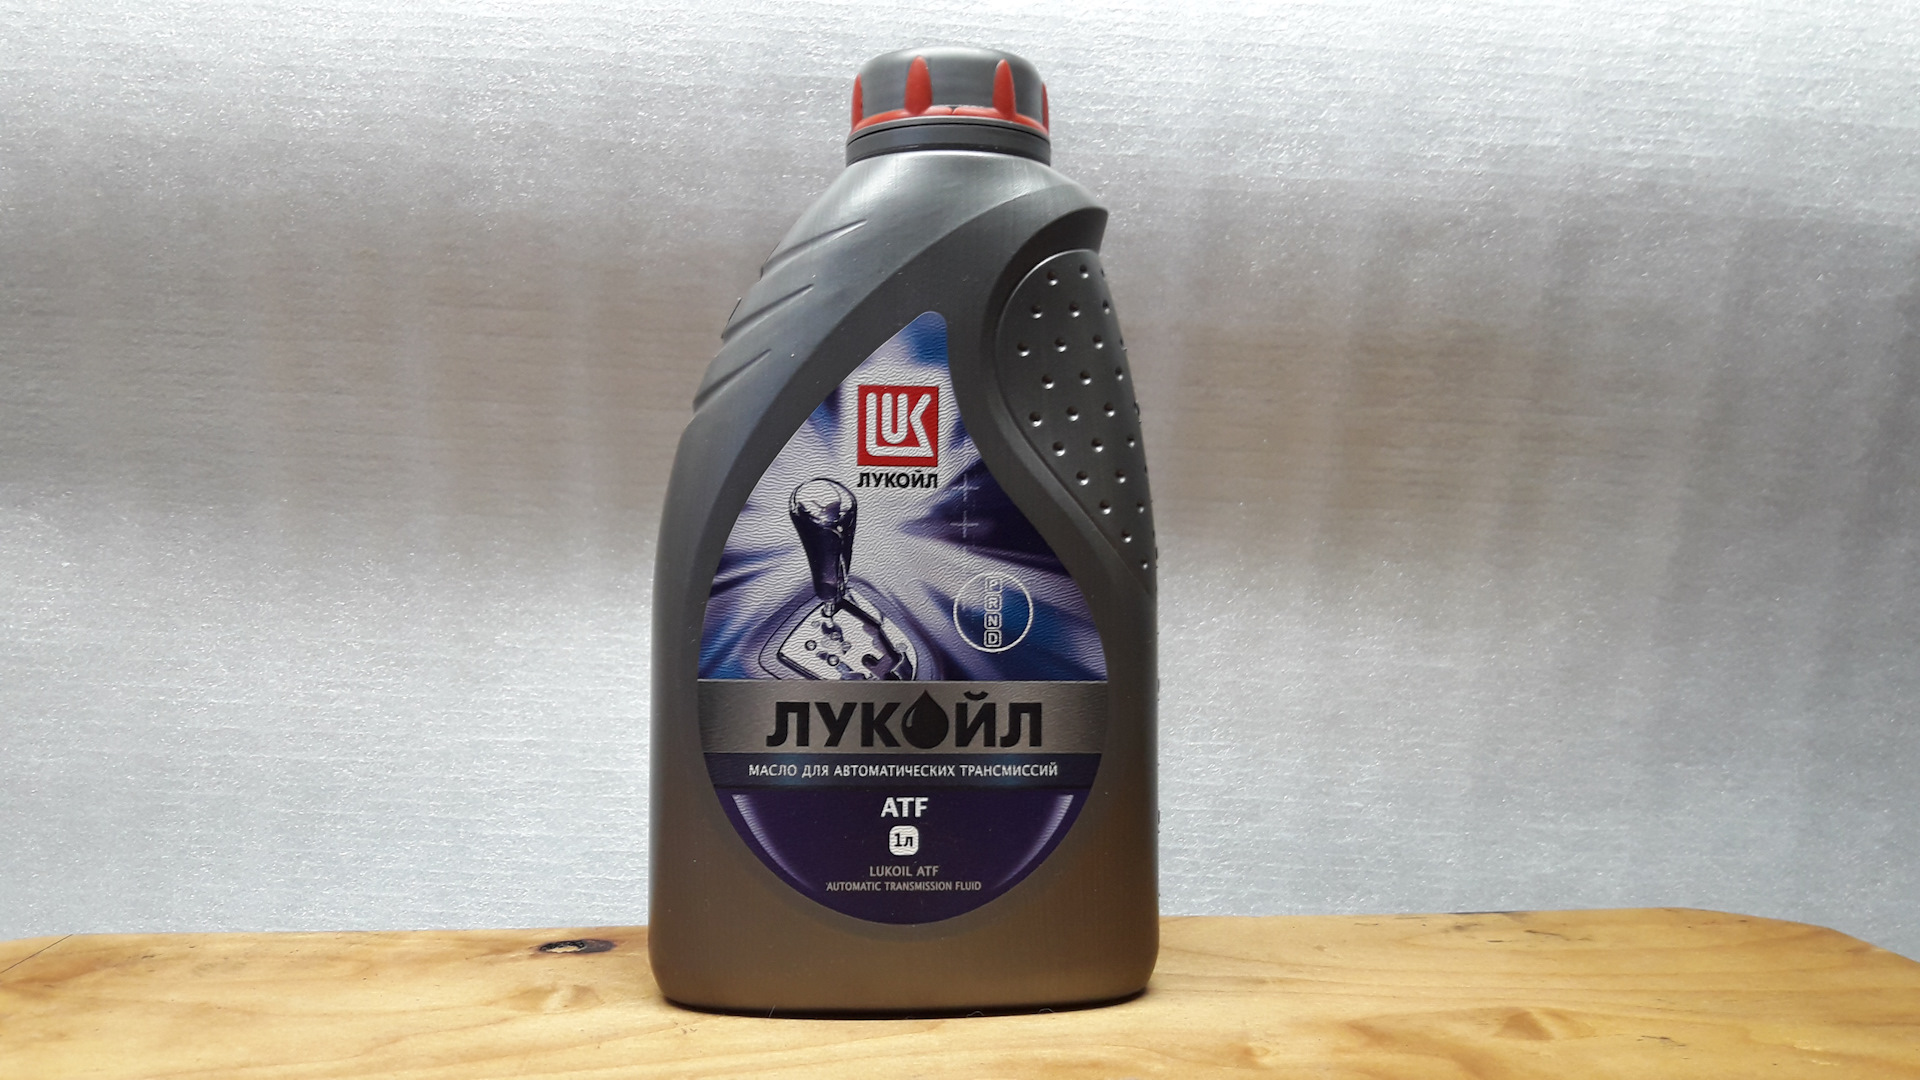 Atf d iii. Lukoil ATF 4l. Lukoil ATF Synth MN z3. ATF 2 Лукойл бочка. Lukoil ATF Synth 6 216.